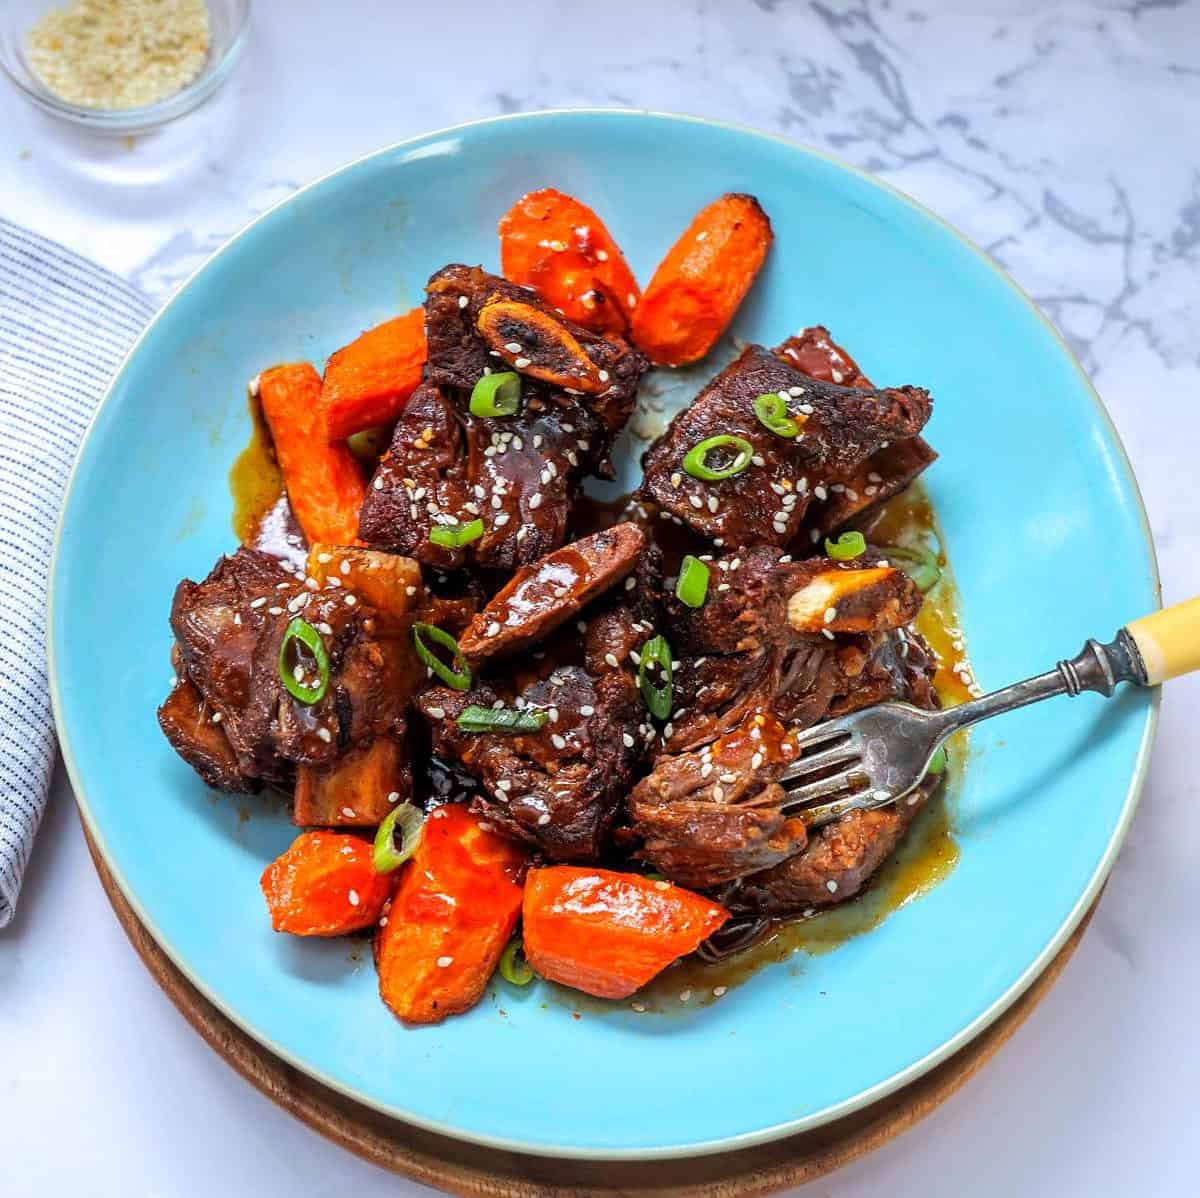  Juicy, marinated short ribs paired with colorful vegetables.